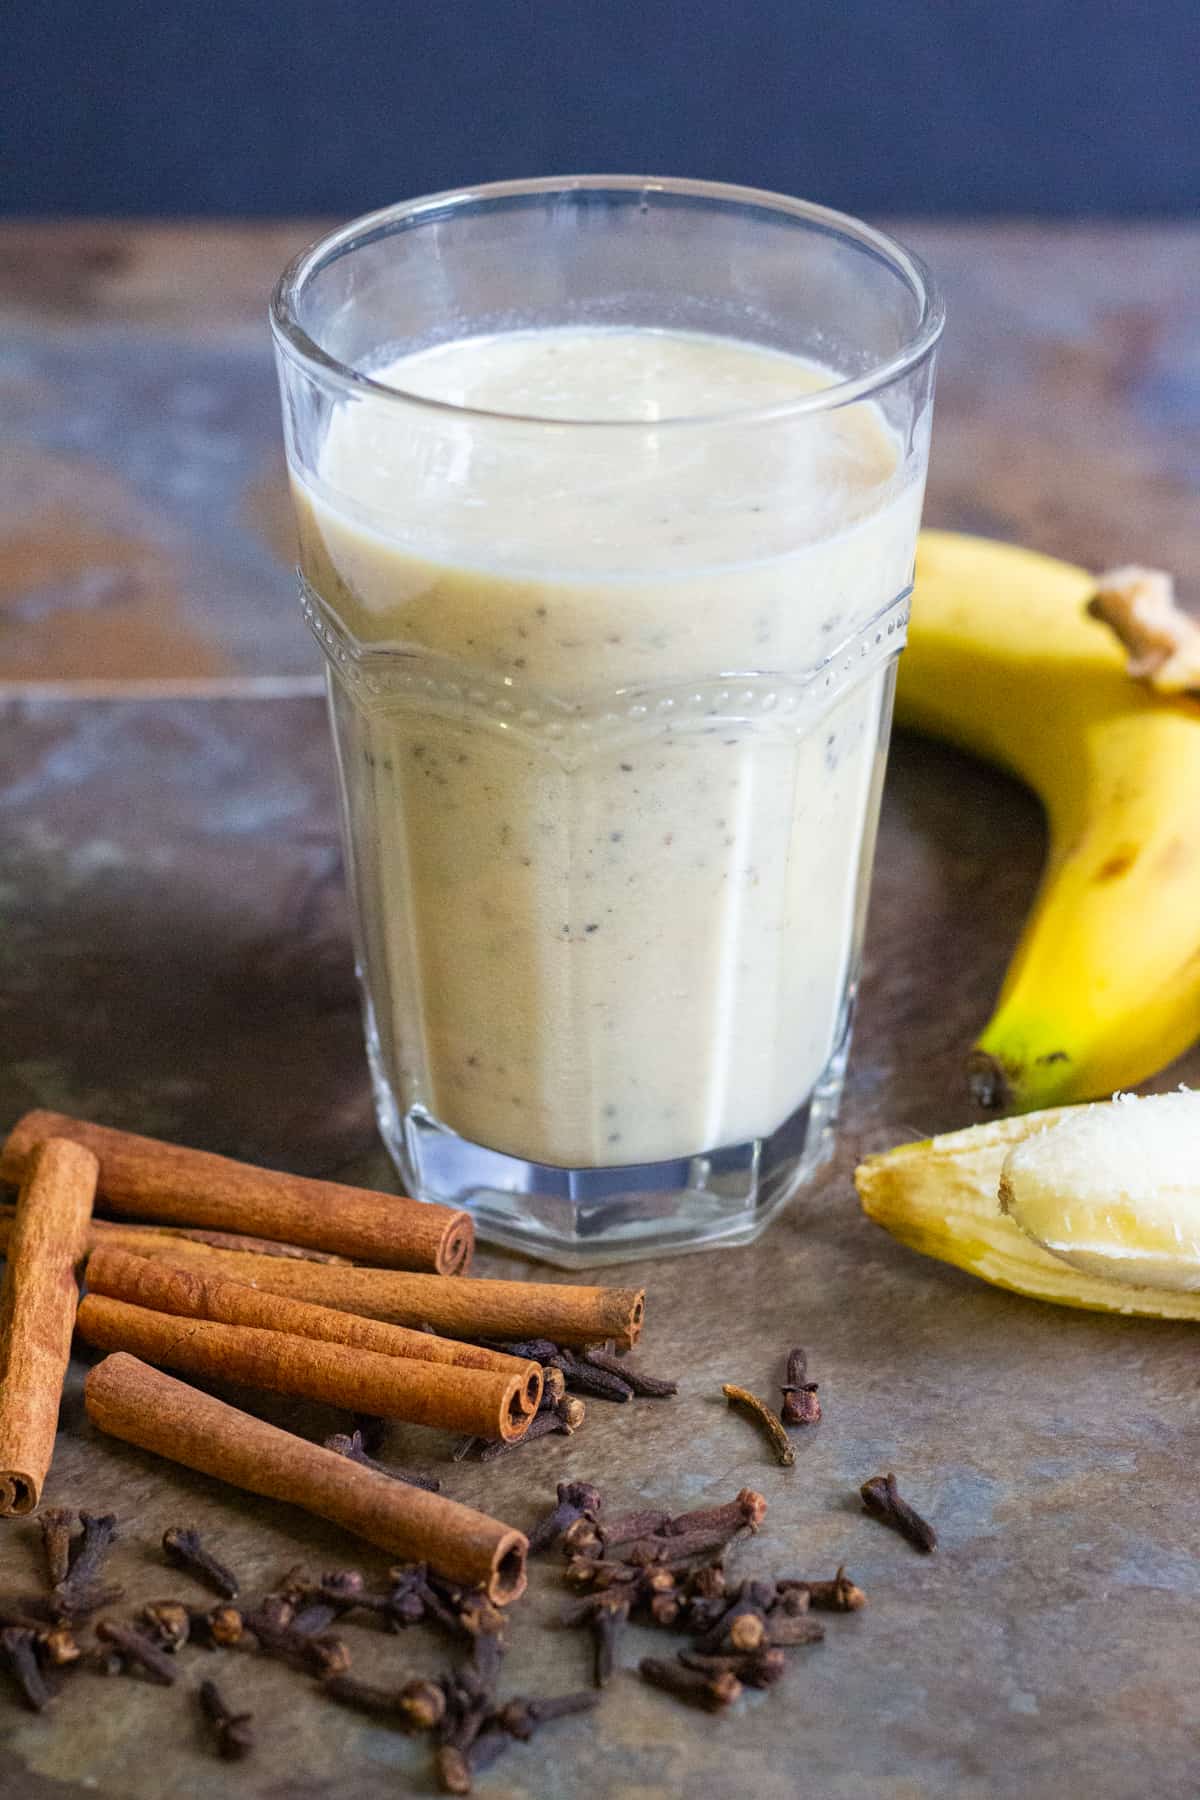 Start your morning with a lot of energy by making this Honey Banana Chai Shake. It's naturally sweetened and full of amazing flavors!